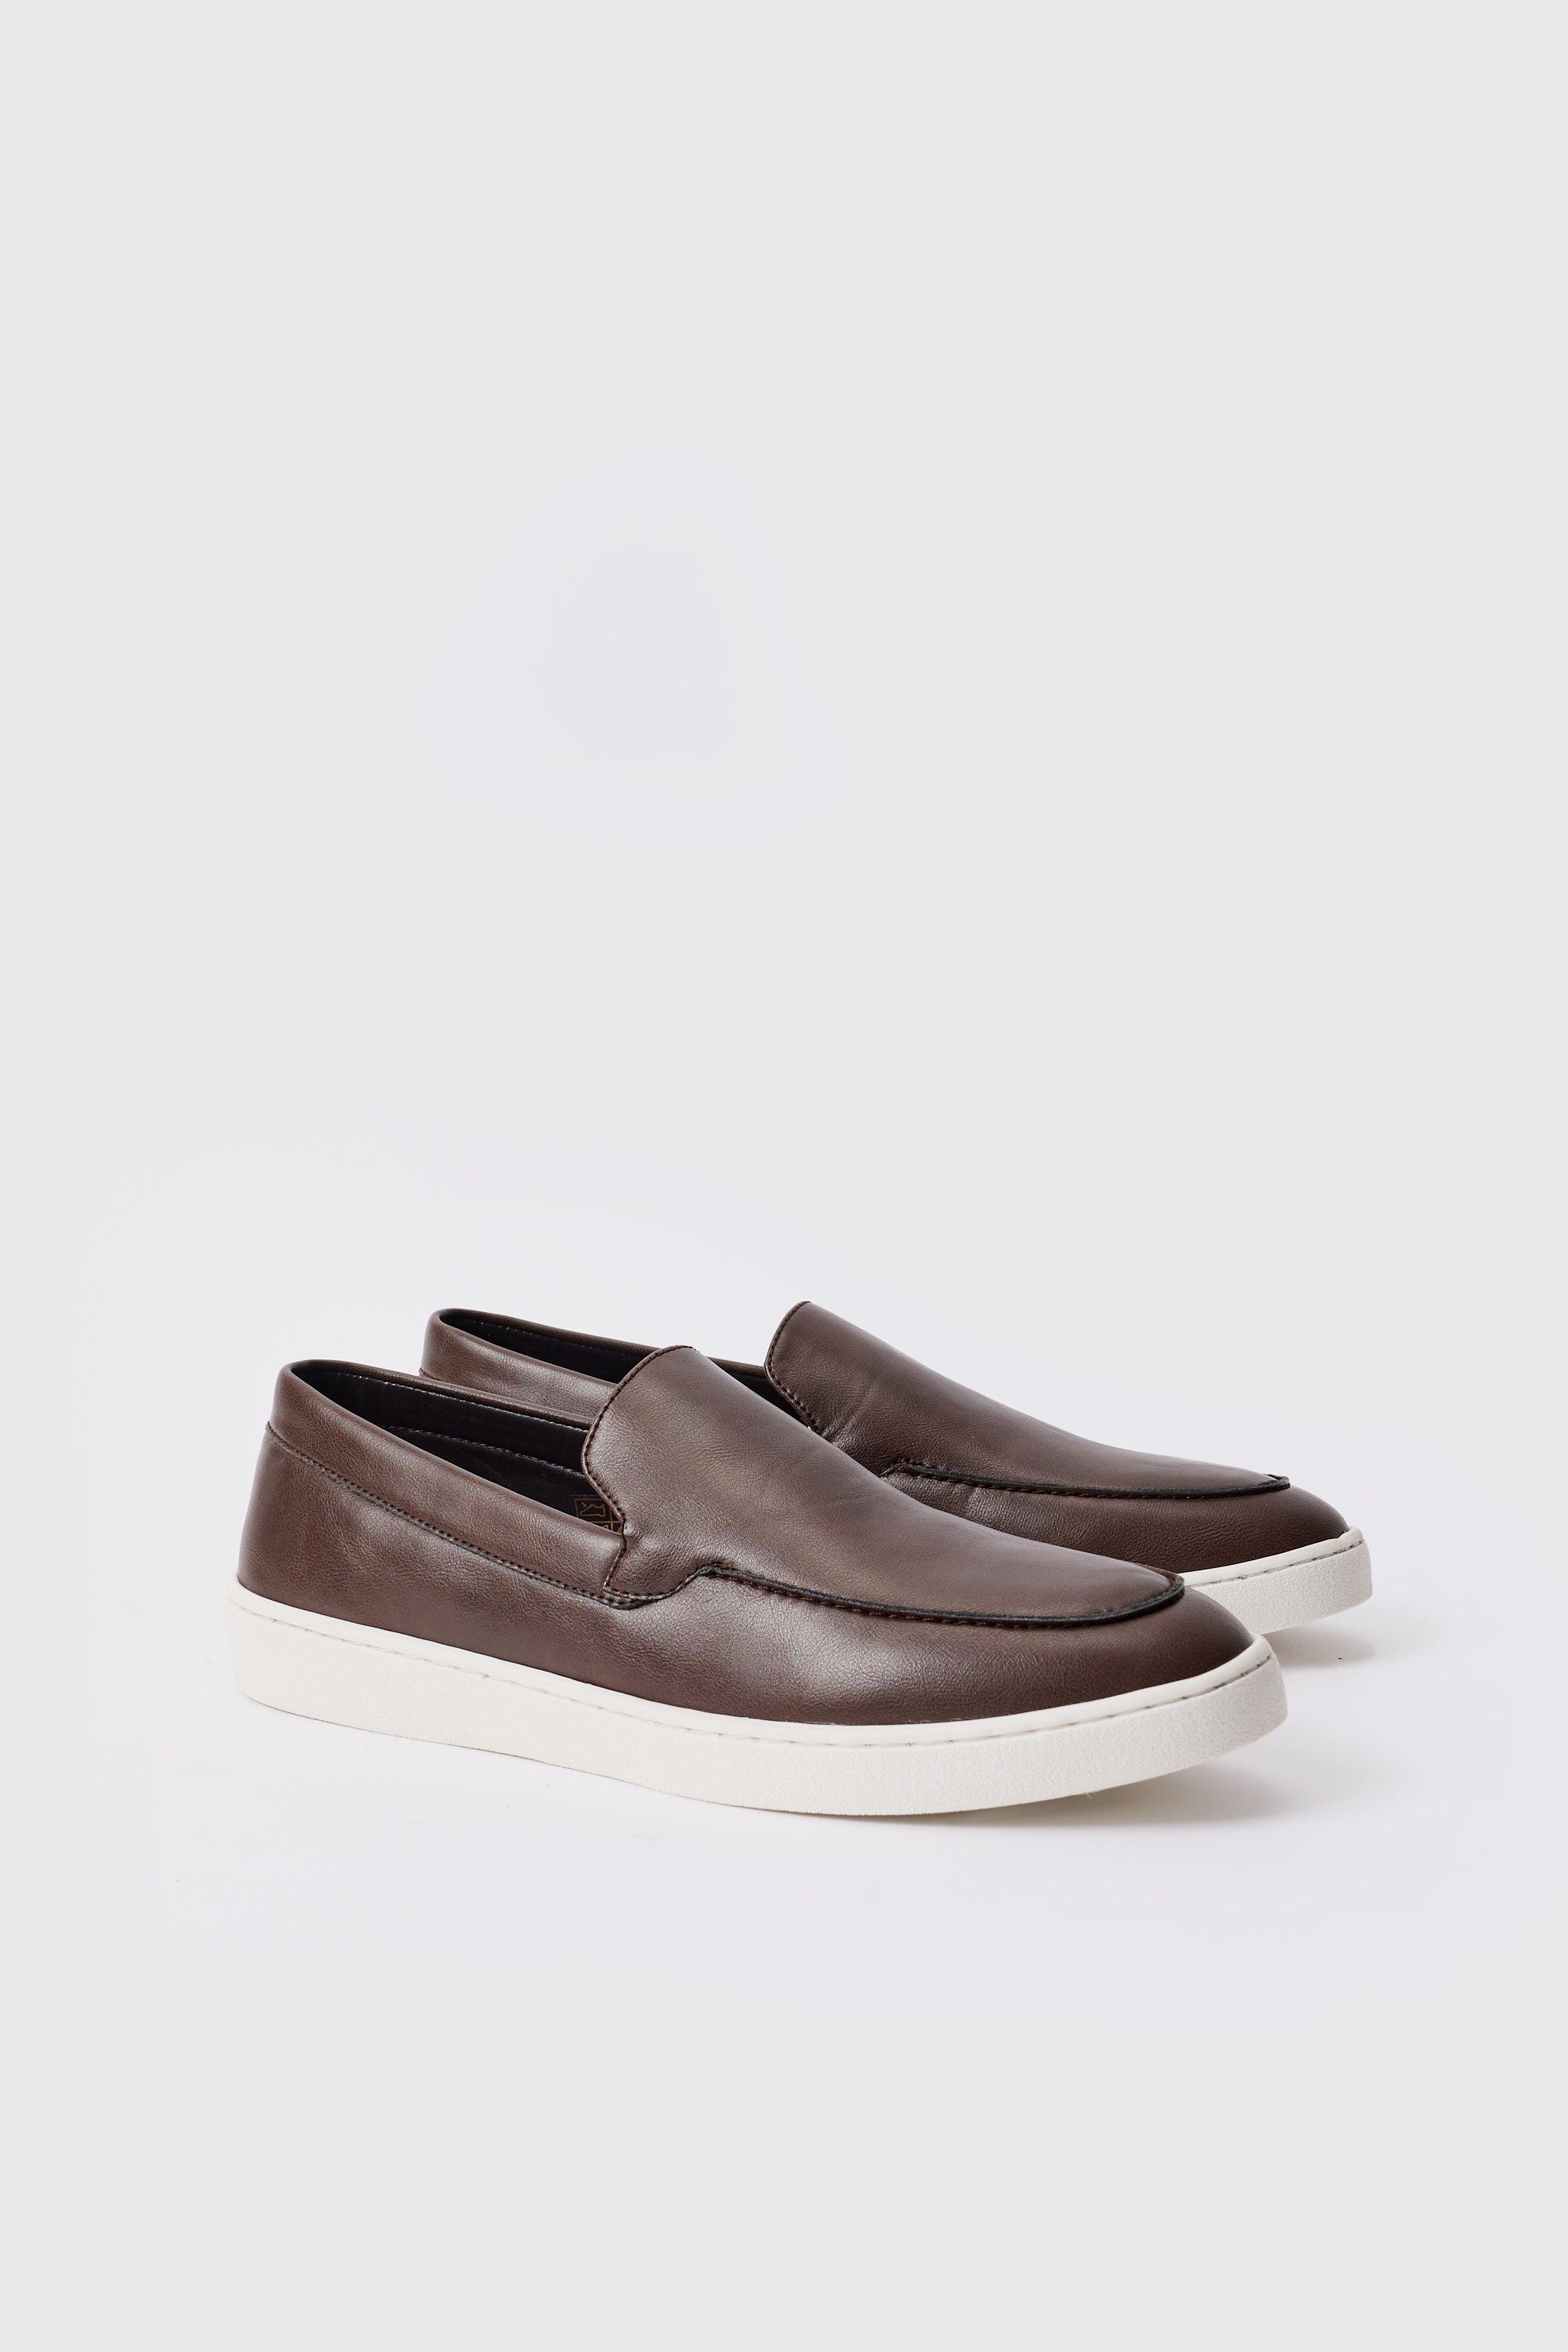 Image of Pu Slip On Loafer In Brown, Brown